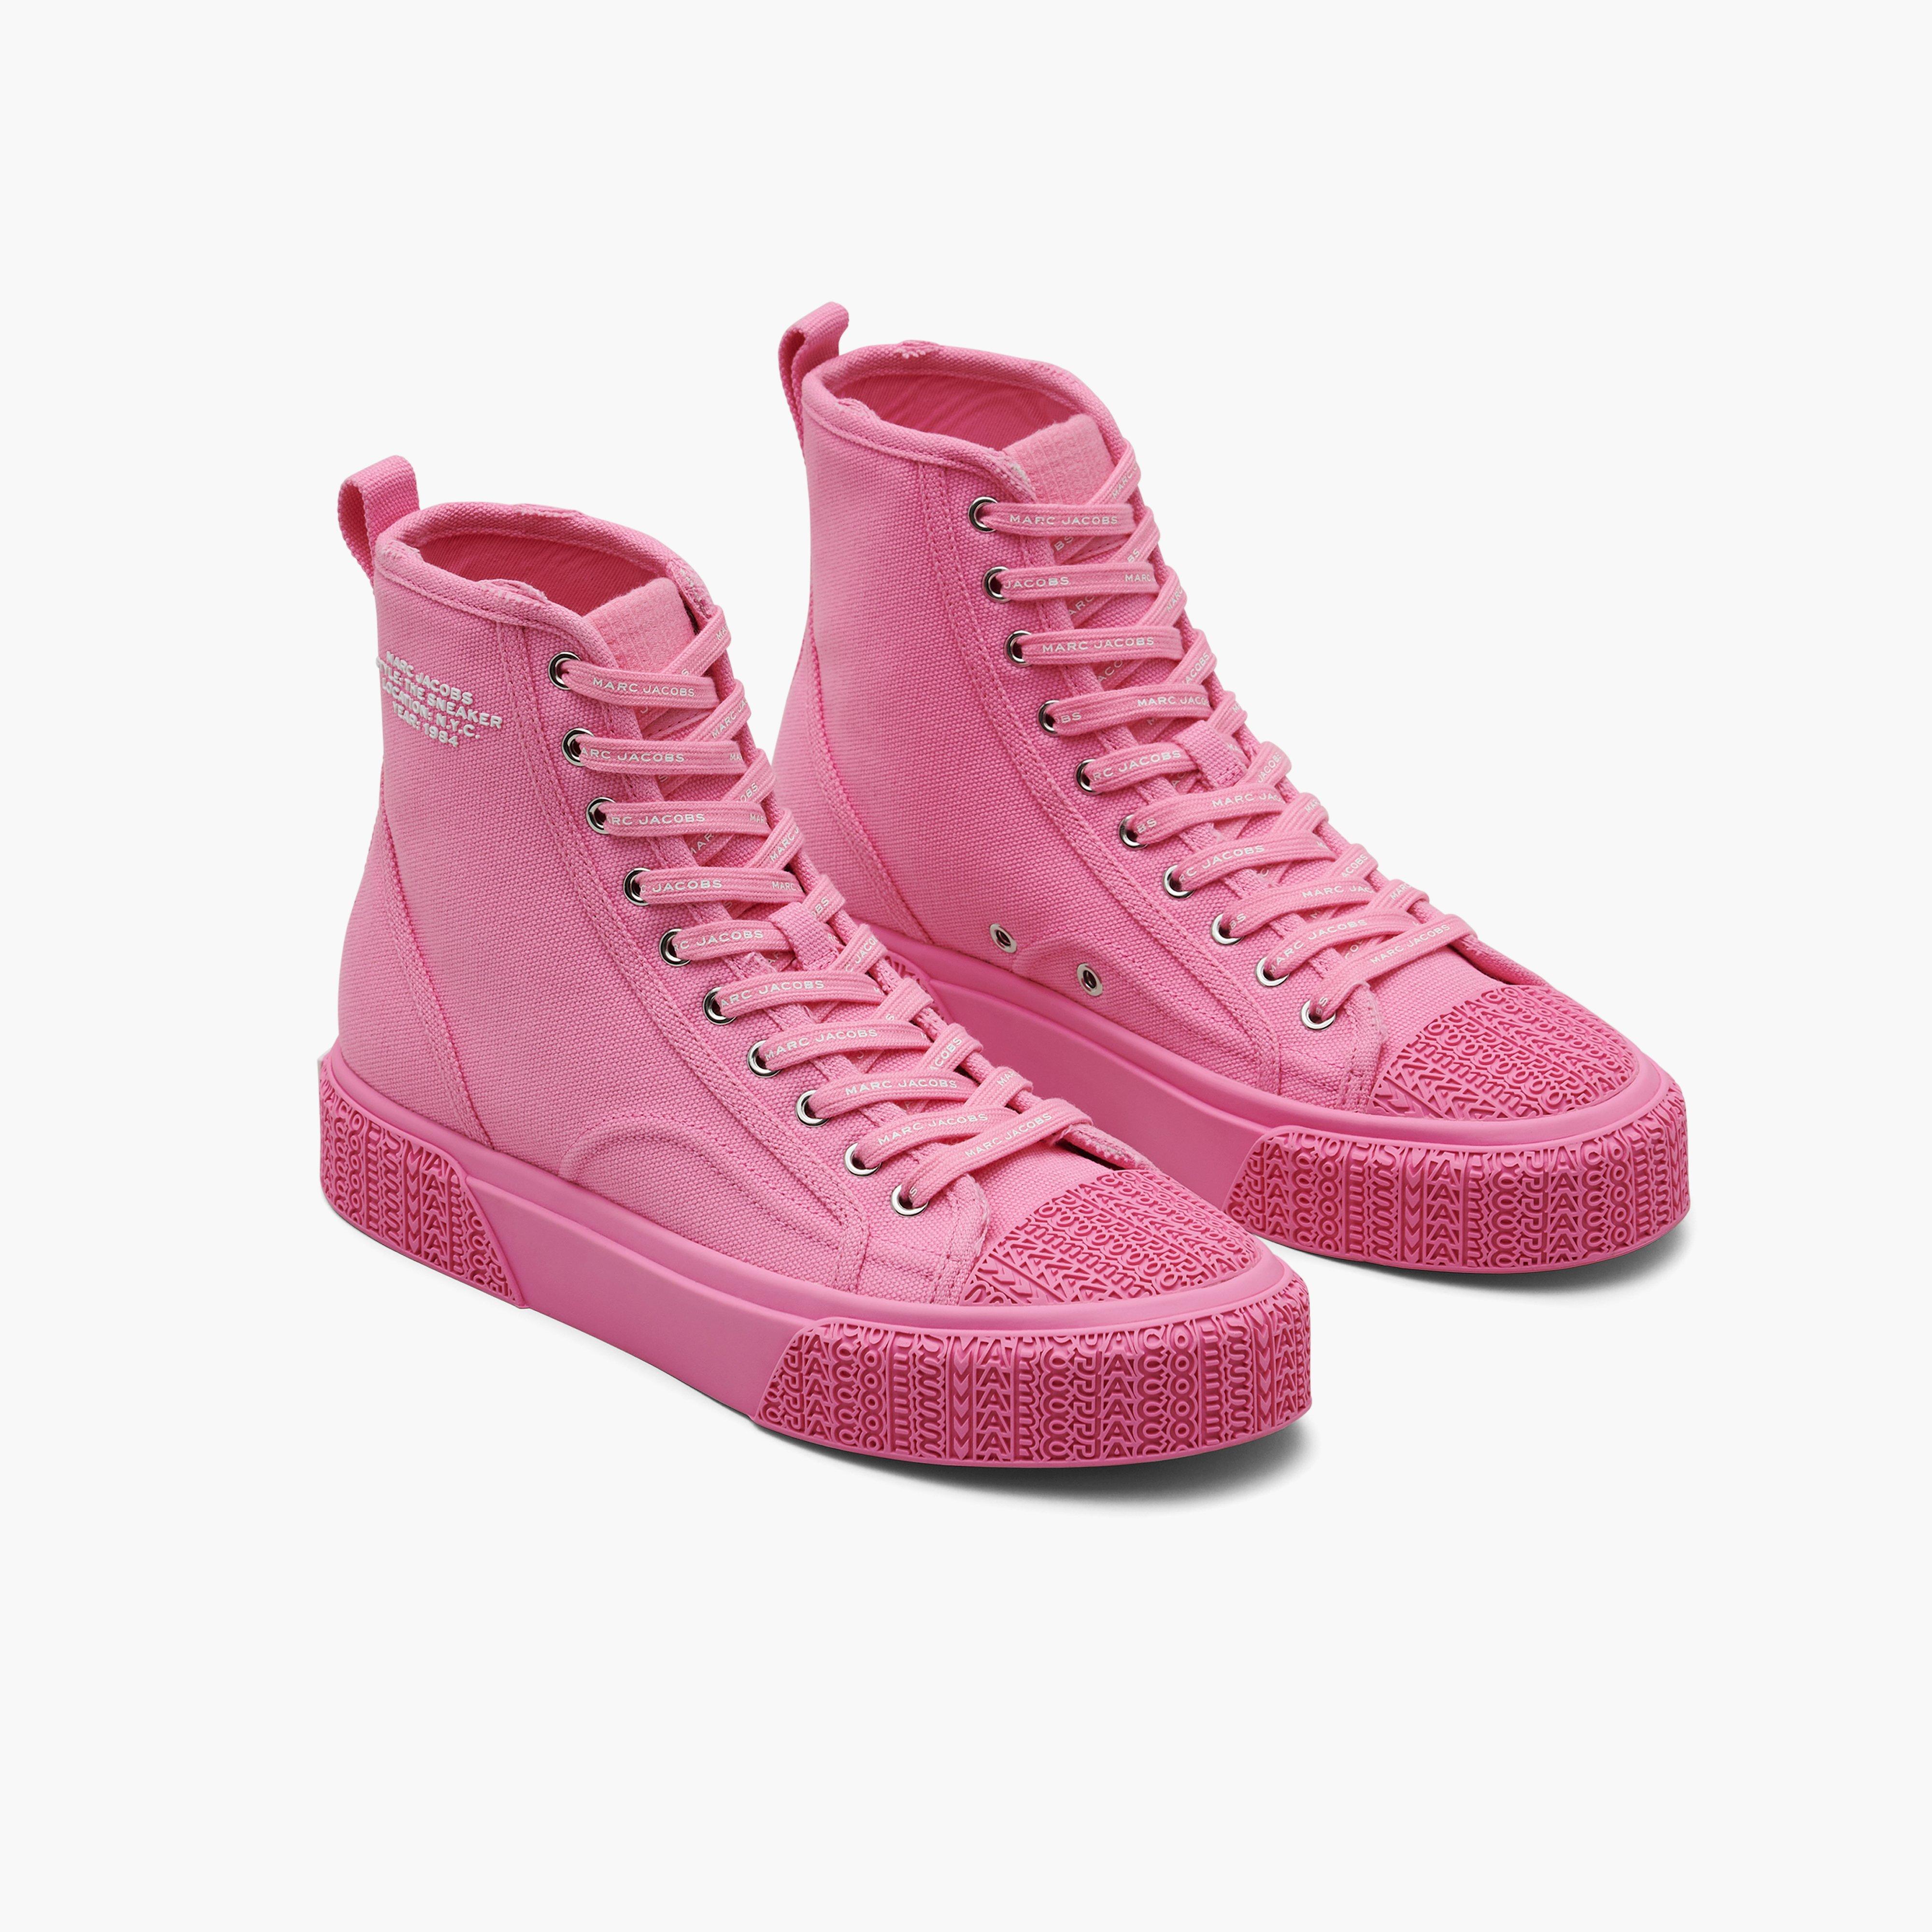 Marc by Marc jacobs The High Top Sneaker,PETAL PINK